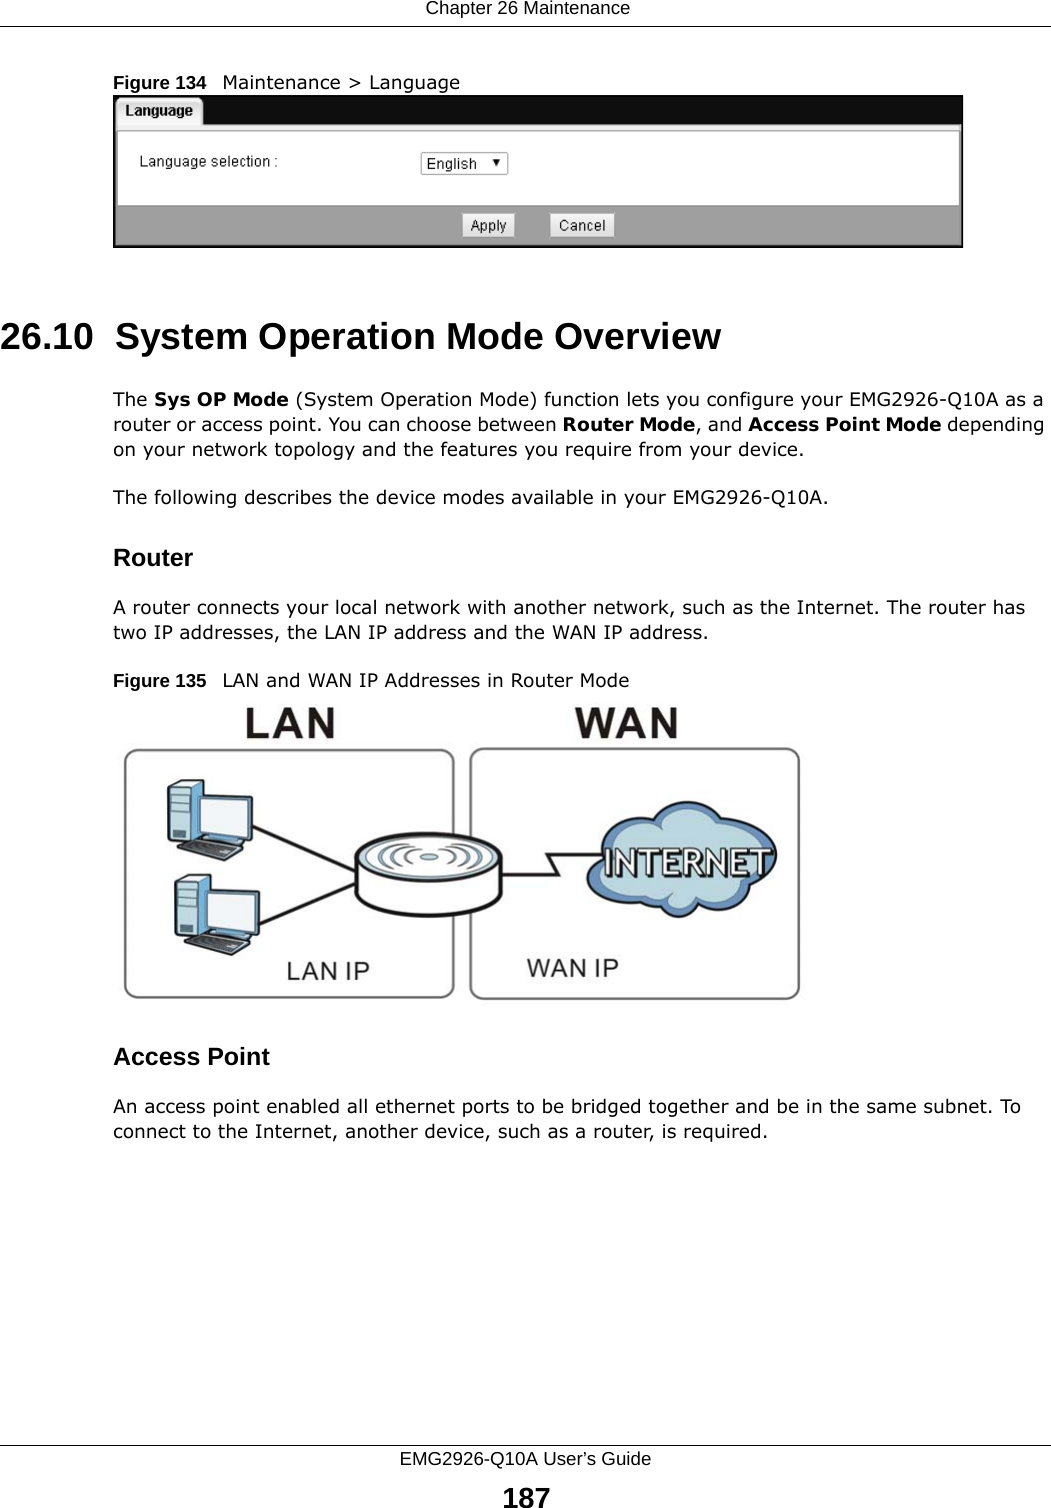  Chapter 26 MaintenanceEMG2926-Q10A User’s Guide187Figure 134   Maintenance &gt; Language 26.10  System Operation Mode OverviewThe Sys OP Mode (System Operation Mode) function lets you configure your EMG2926-Q10A as a router or access point. You can choose between Router Mode, and Access Point Mode depending on your network topology and the features you require from your device. The following describes the device modes available in your EMG2926-Q10A.RouterA router connects your local network with another network, such as the Internet. The router has two IP addresses, the LAN IP address and the WAN IP address.Figure 135   LAN and WAN IP Addresses in Router ModeAccess PointAn access point enabled all ethernet ports to be bridged together and be in the same subnet. To connect to the Internet, another device, such as a router, is required.